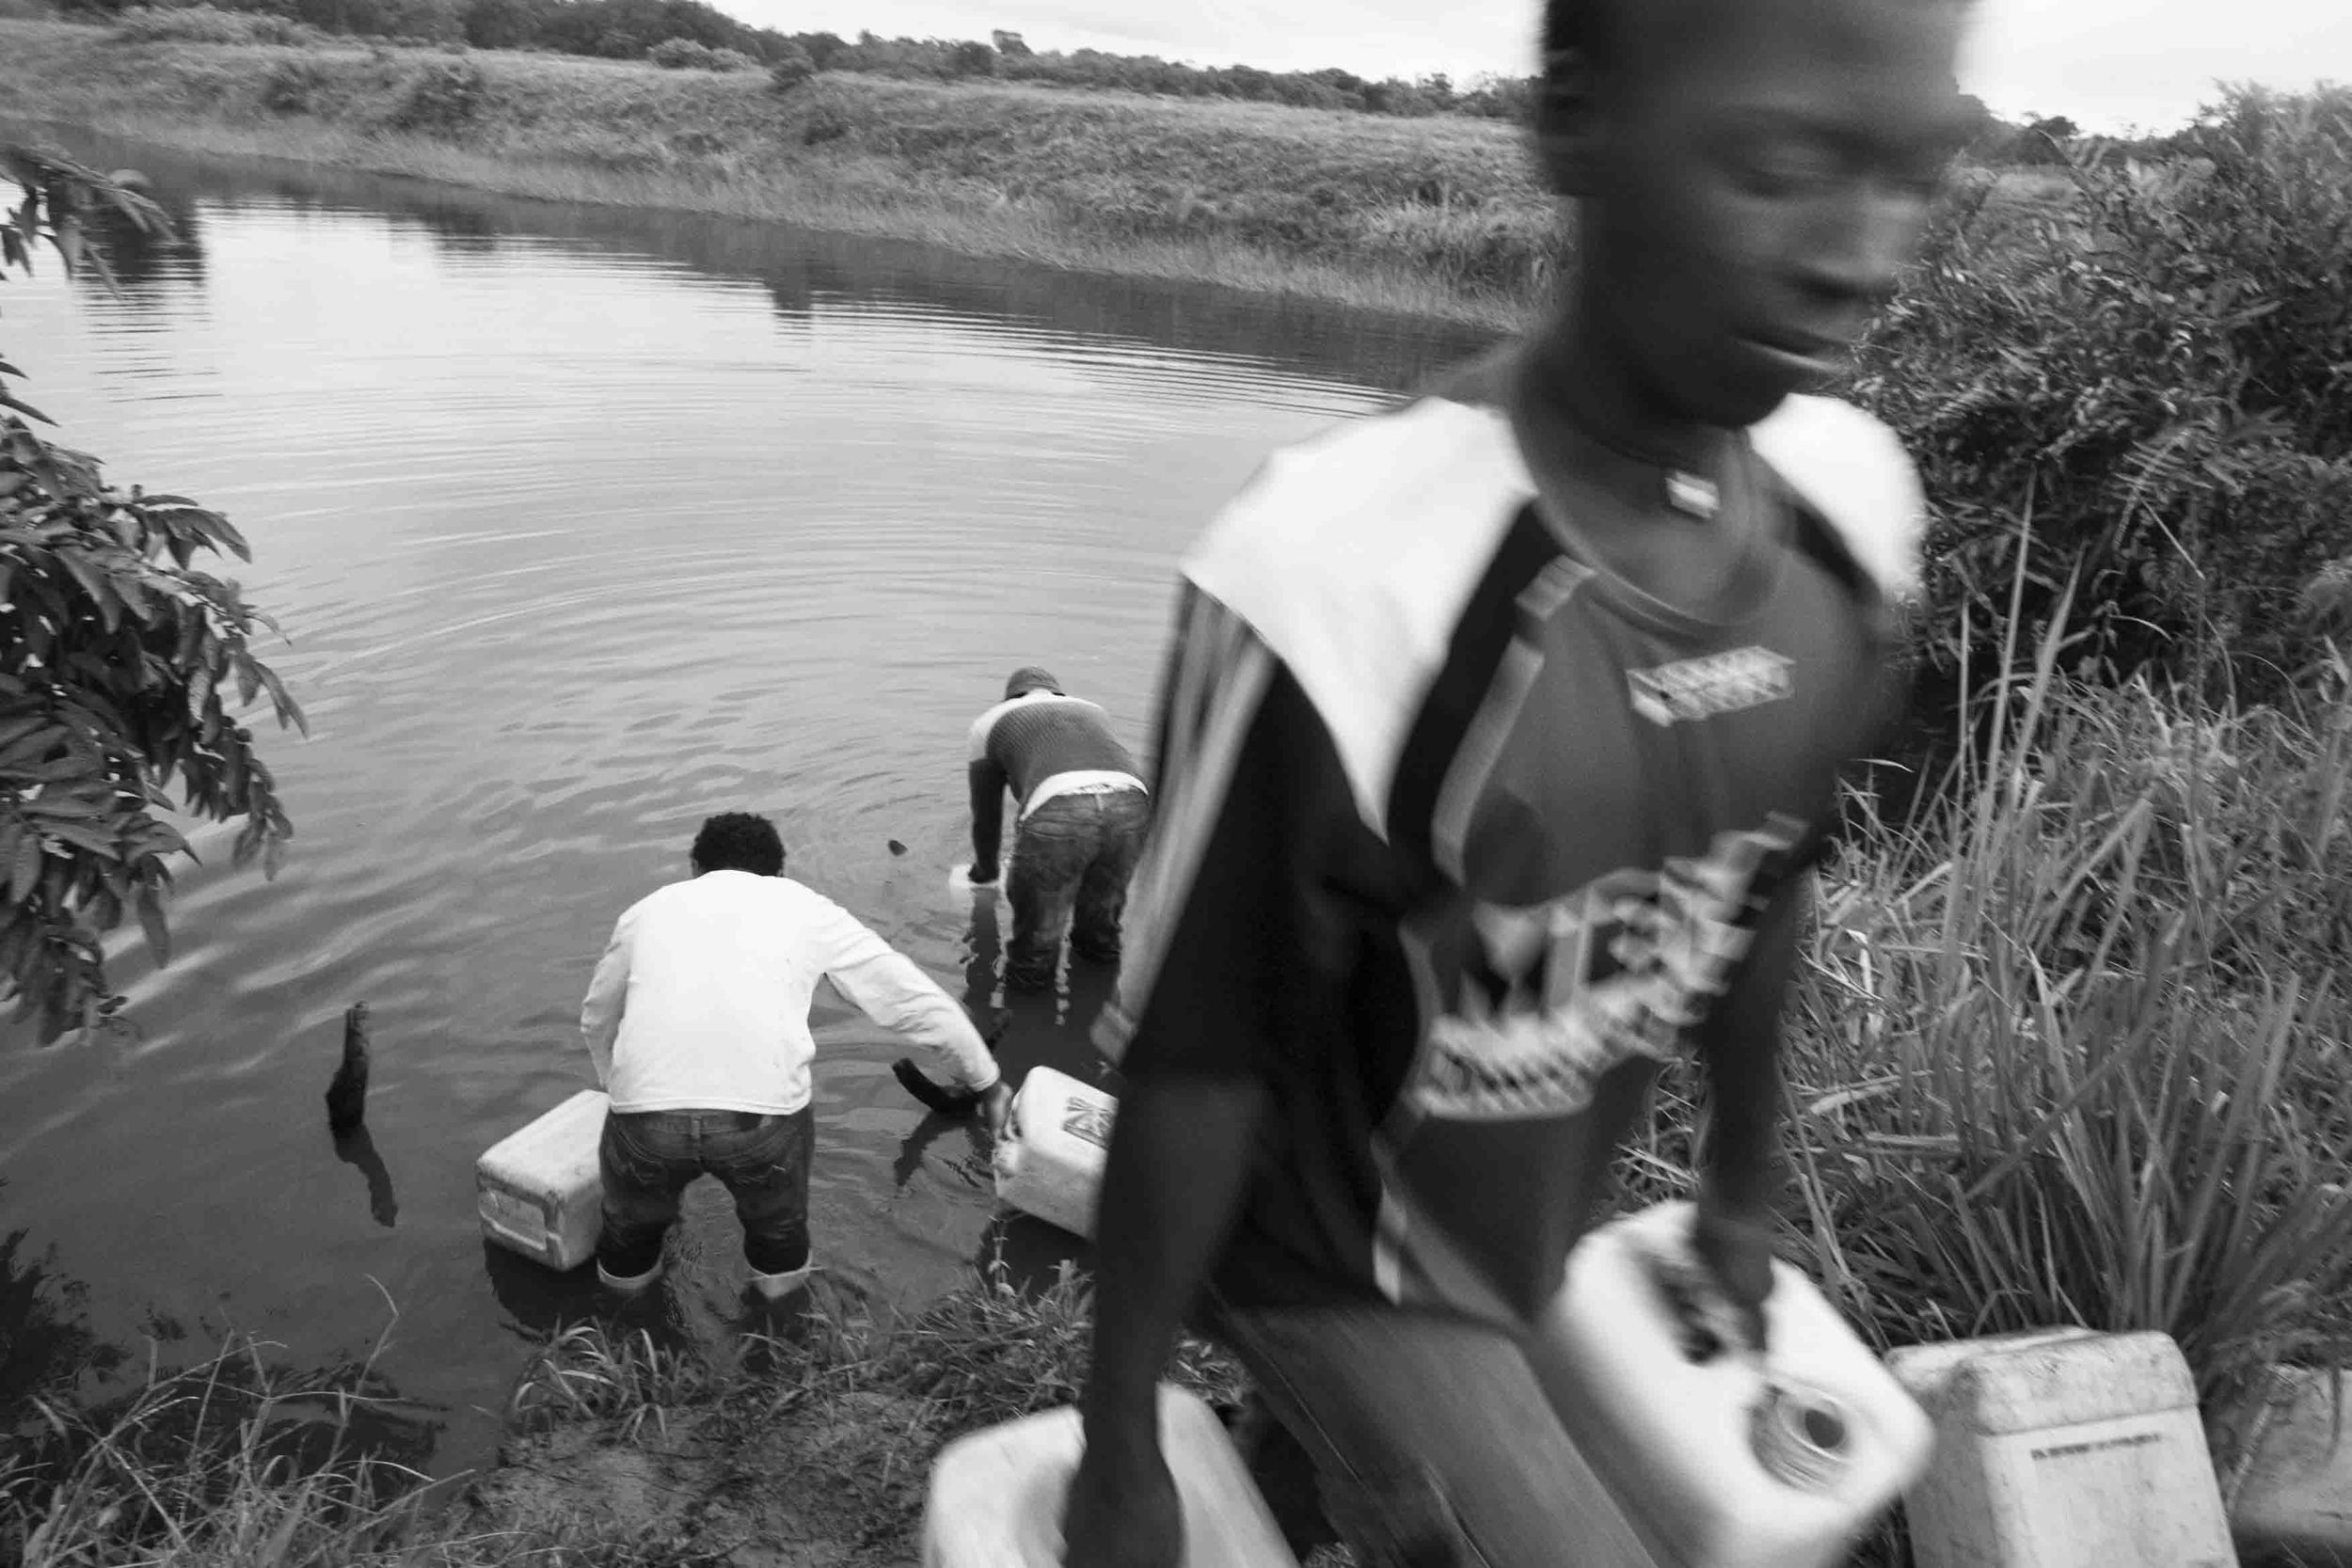  The life of the communities inside the Cayapas Mataje Mangrove Reserve is harsh due to a constant shortage of water. In the picture kids fetch water from a source in a private farm outside the Reserve. Tambillo, Ecuador. 2010. 